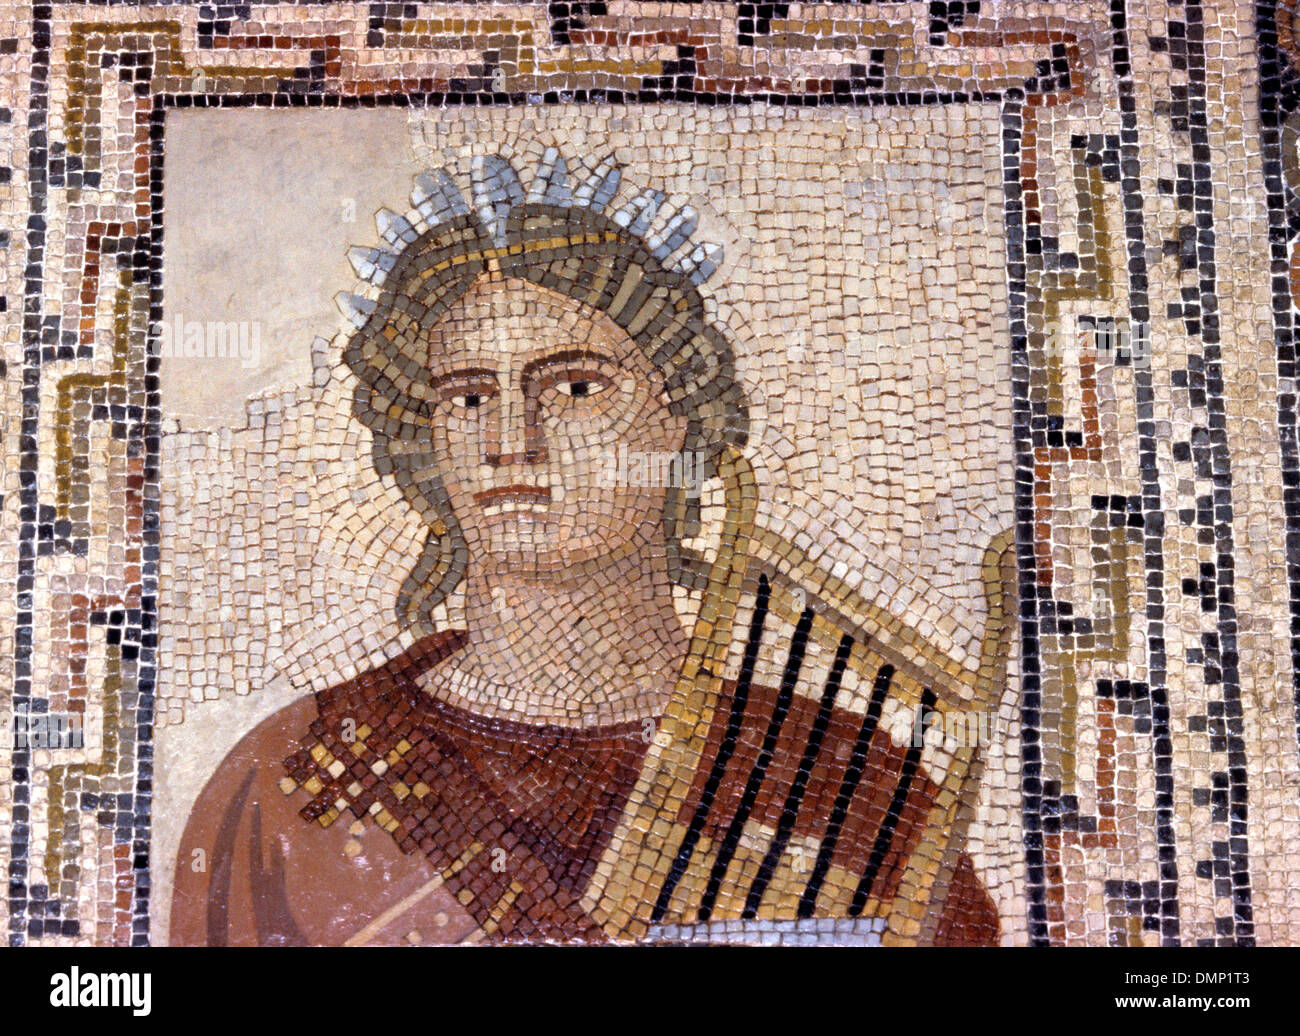 Romano-German period. Mosaic. Terpsichore, muse of lyric, poetry and dance, carrying cithara. Stock Photo